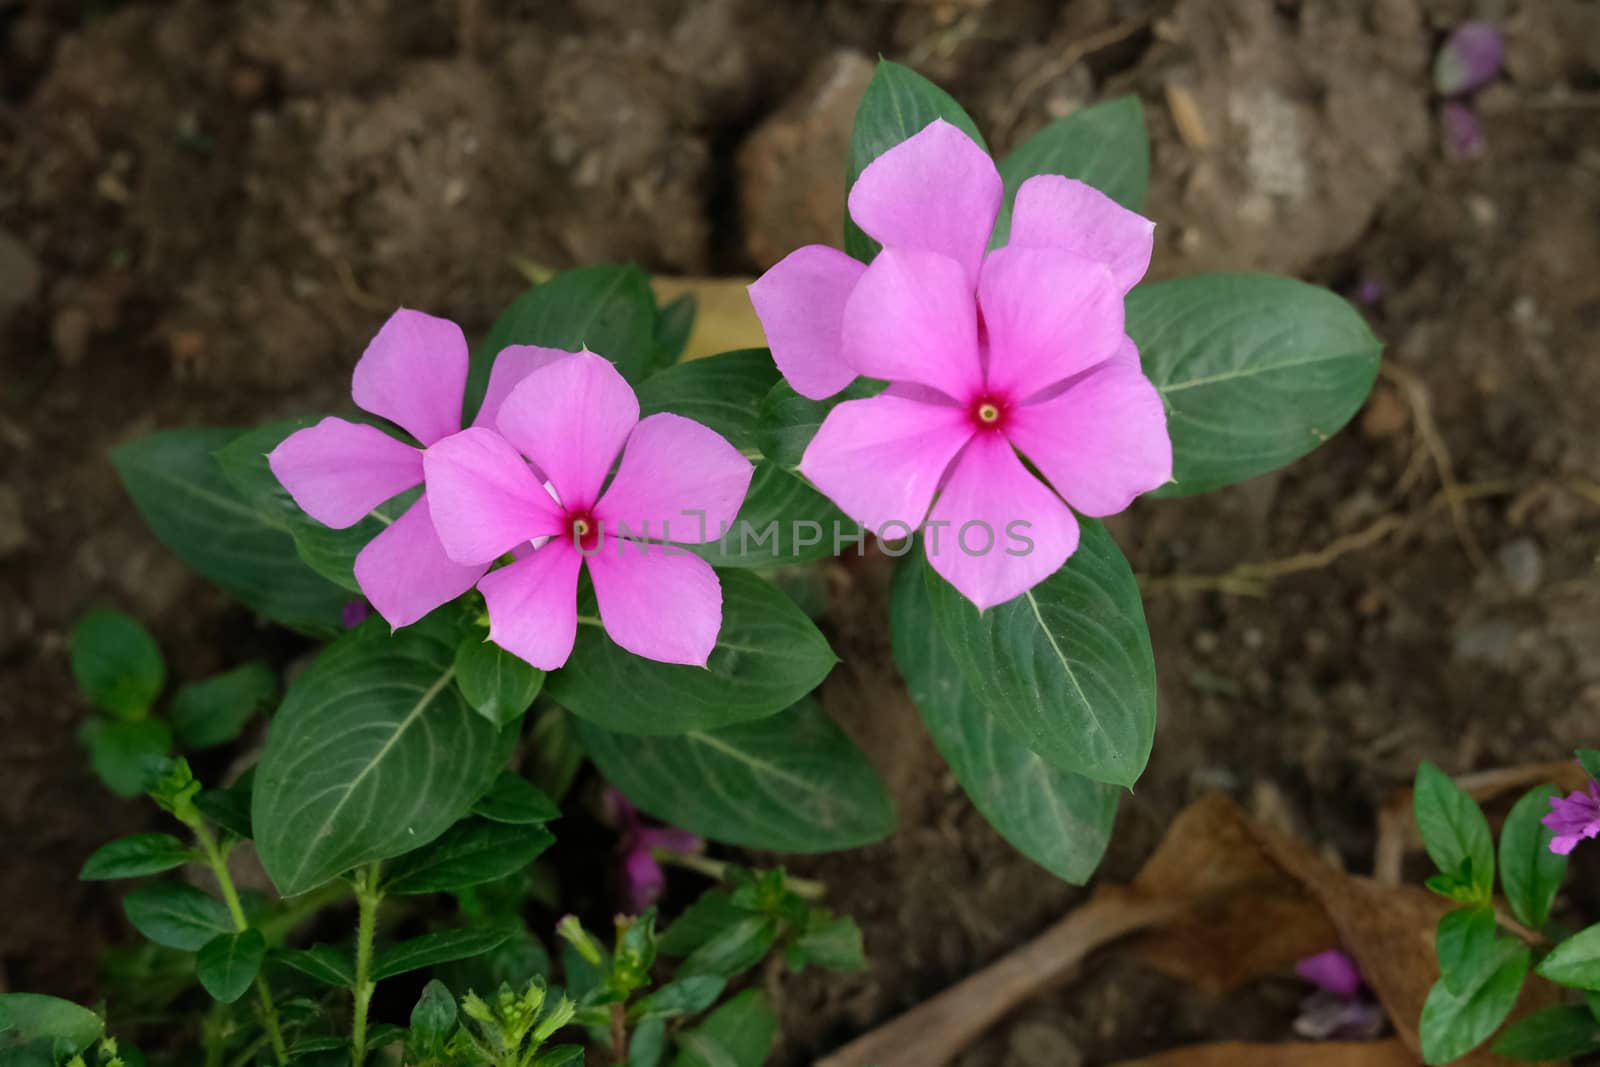 bunch of pink catharanthus roseus flower - cape periwinkle by Macrostud